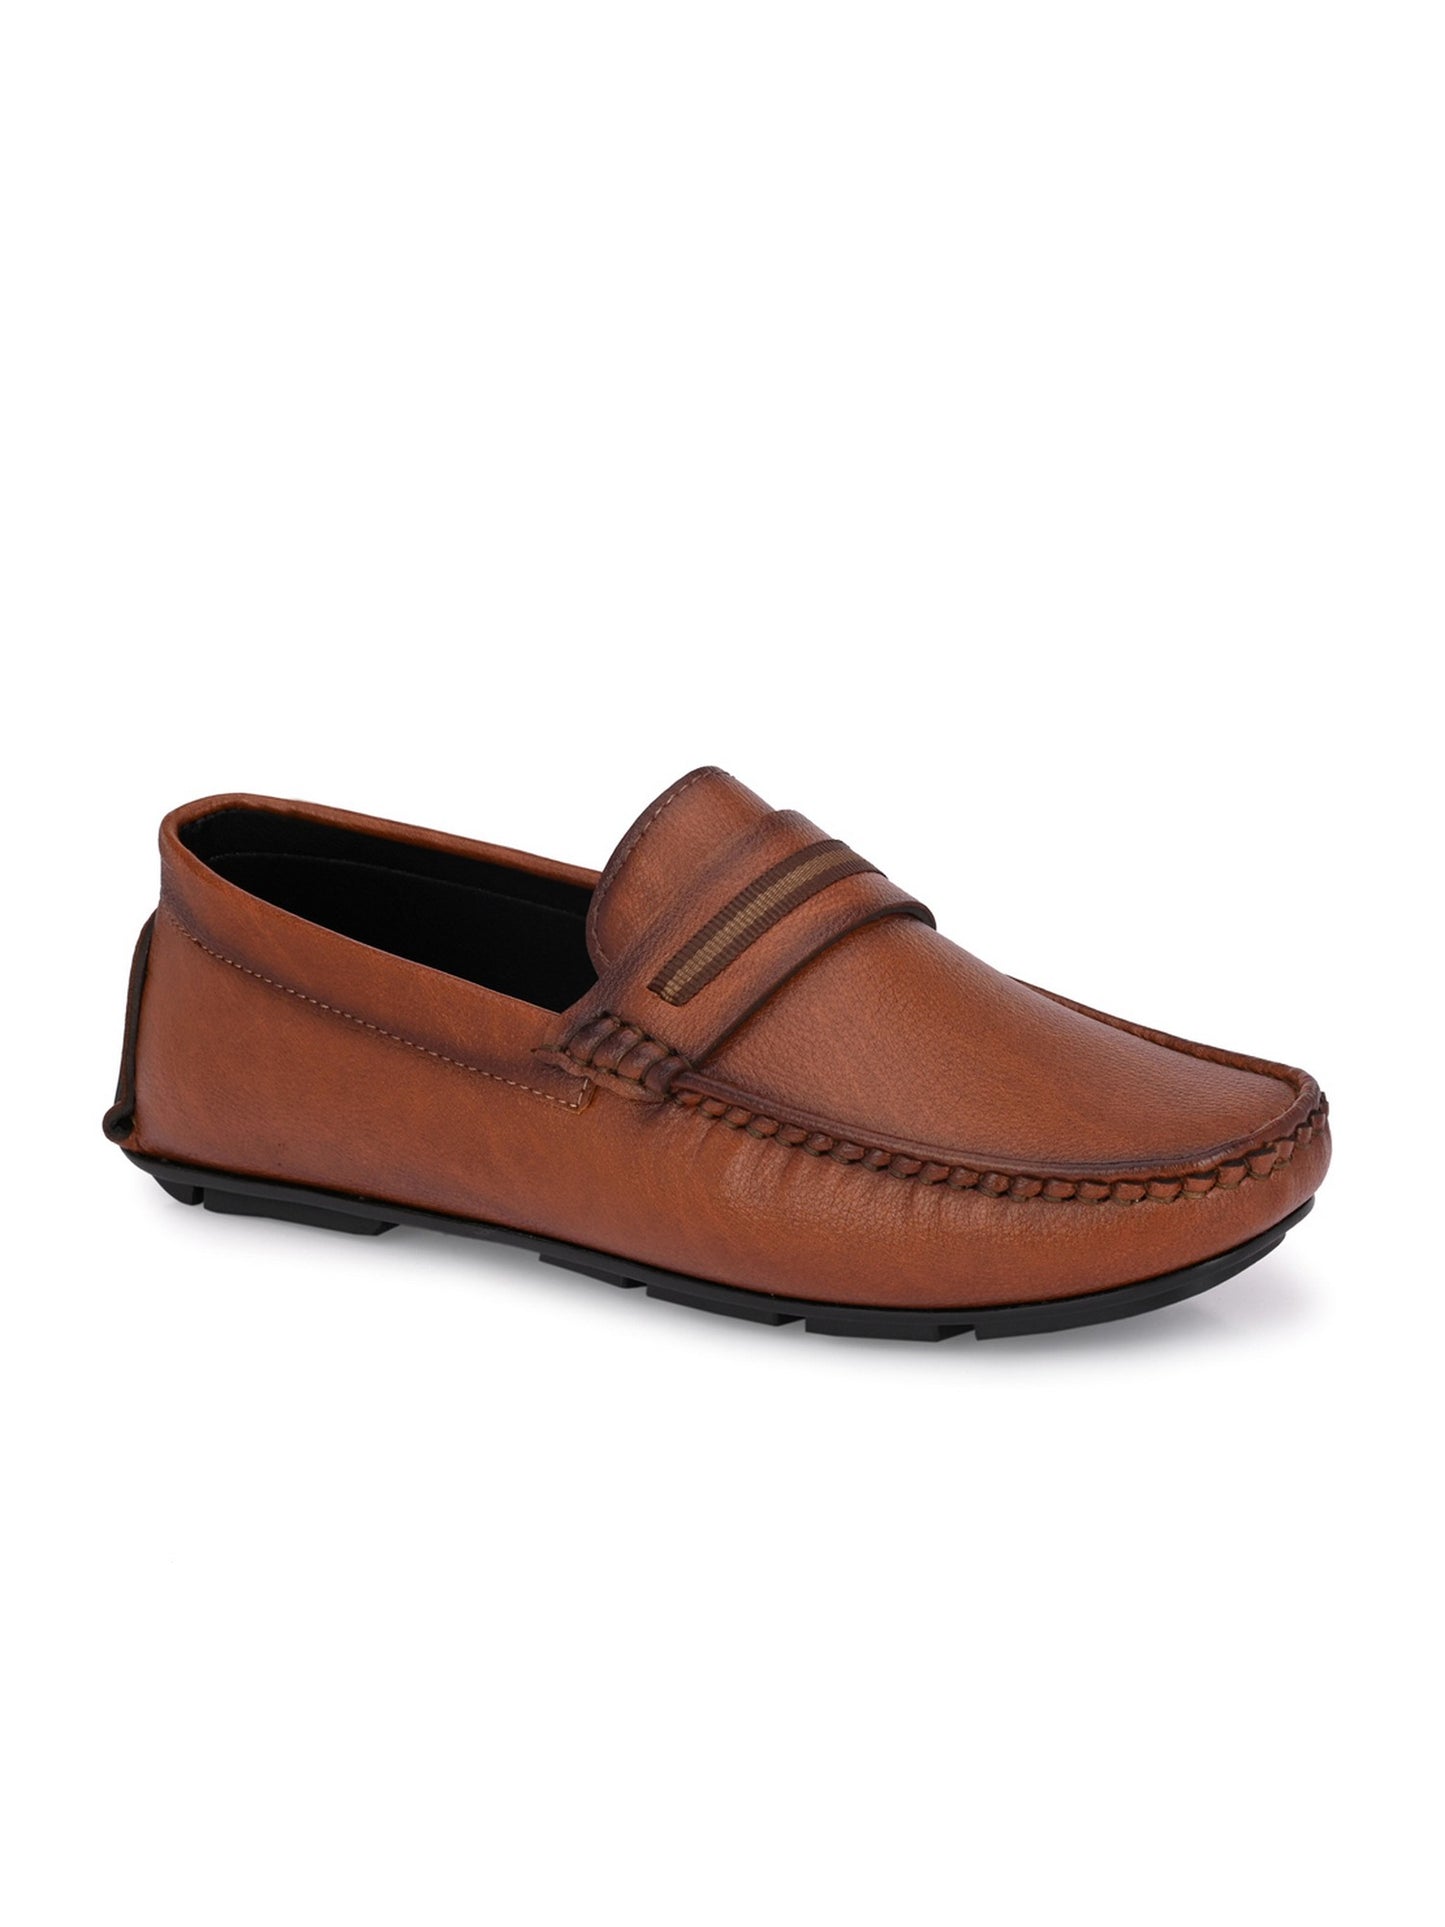 Guava Men's Tan Casual Slip On Driving Loafers (GV15JA784)